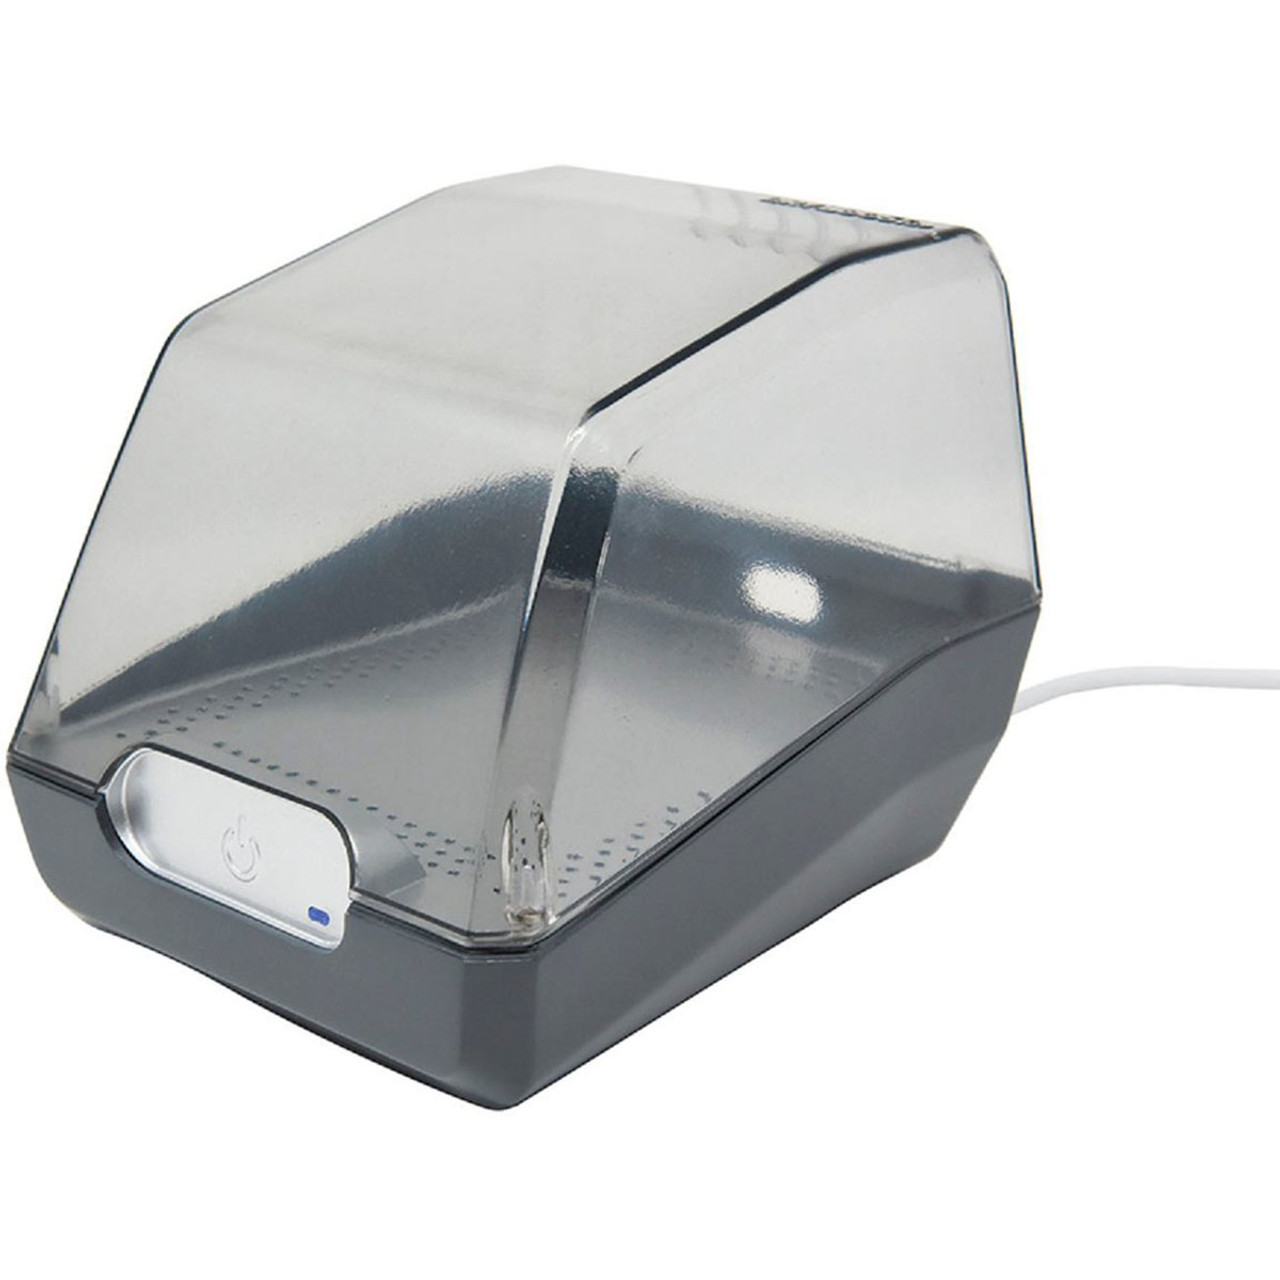 EarTech™ DryBoost UV Hearing Aid Dryer product image